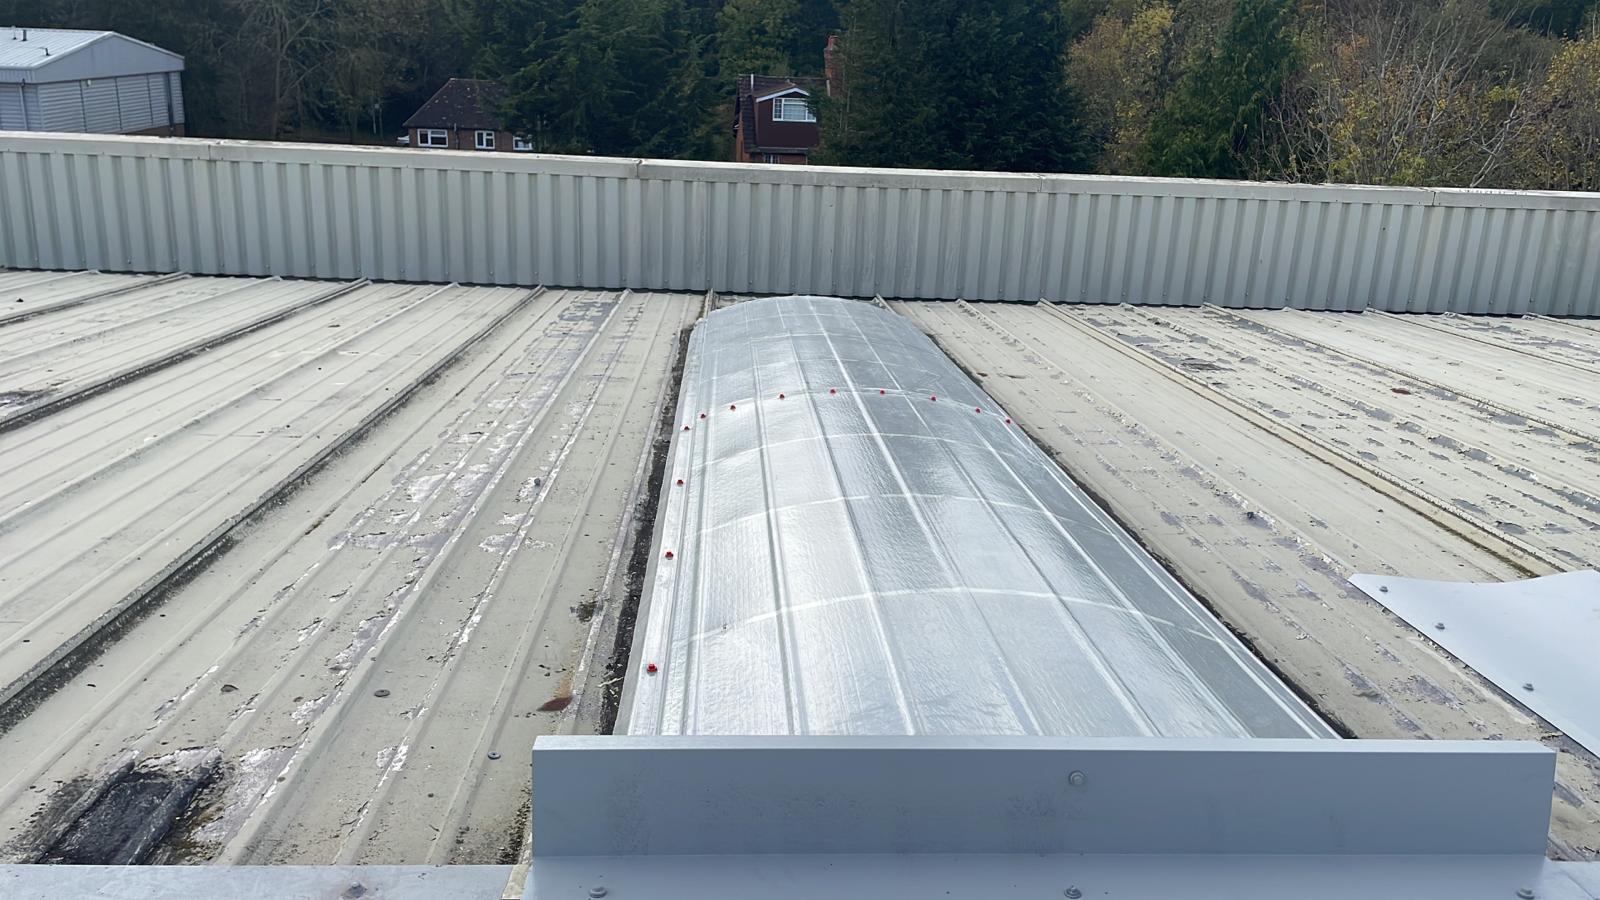 Rooflight replacement on a Warehouse roof in Guildford, Surrey